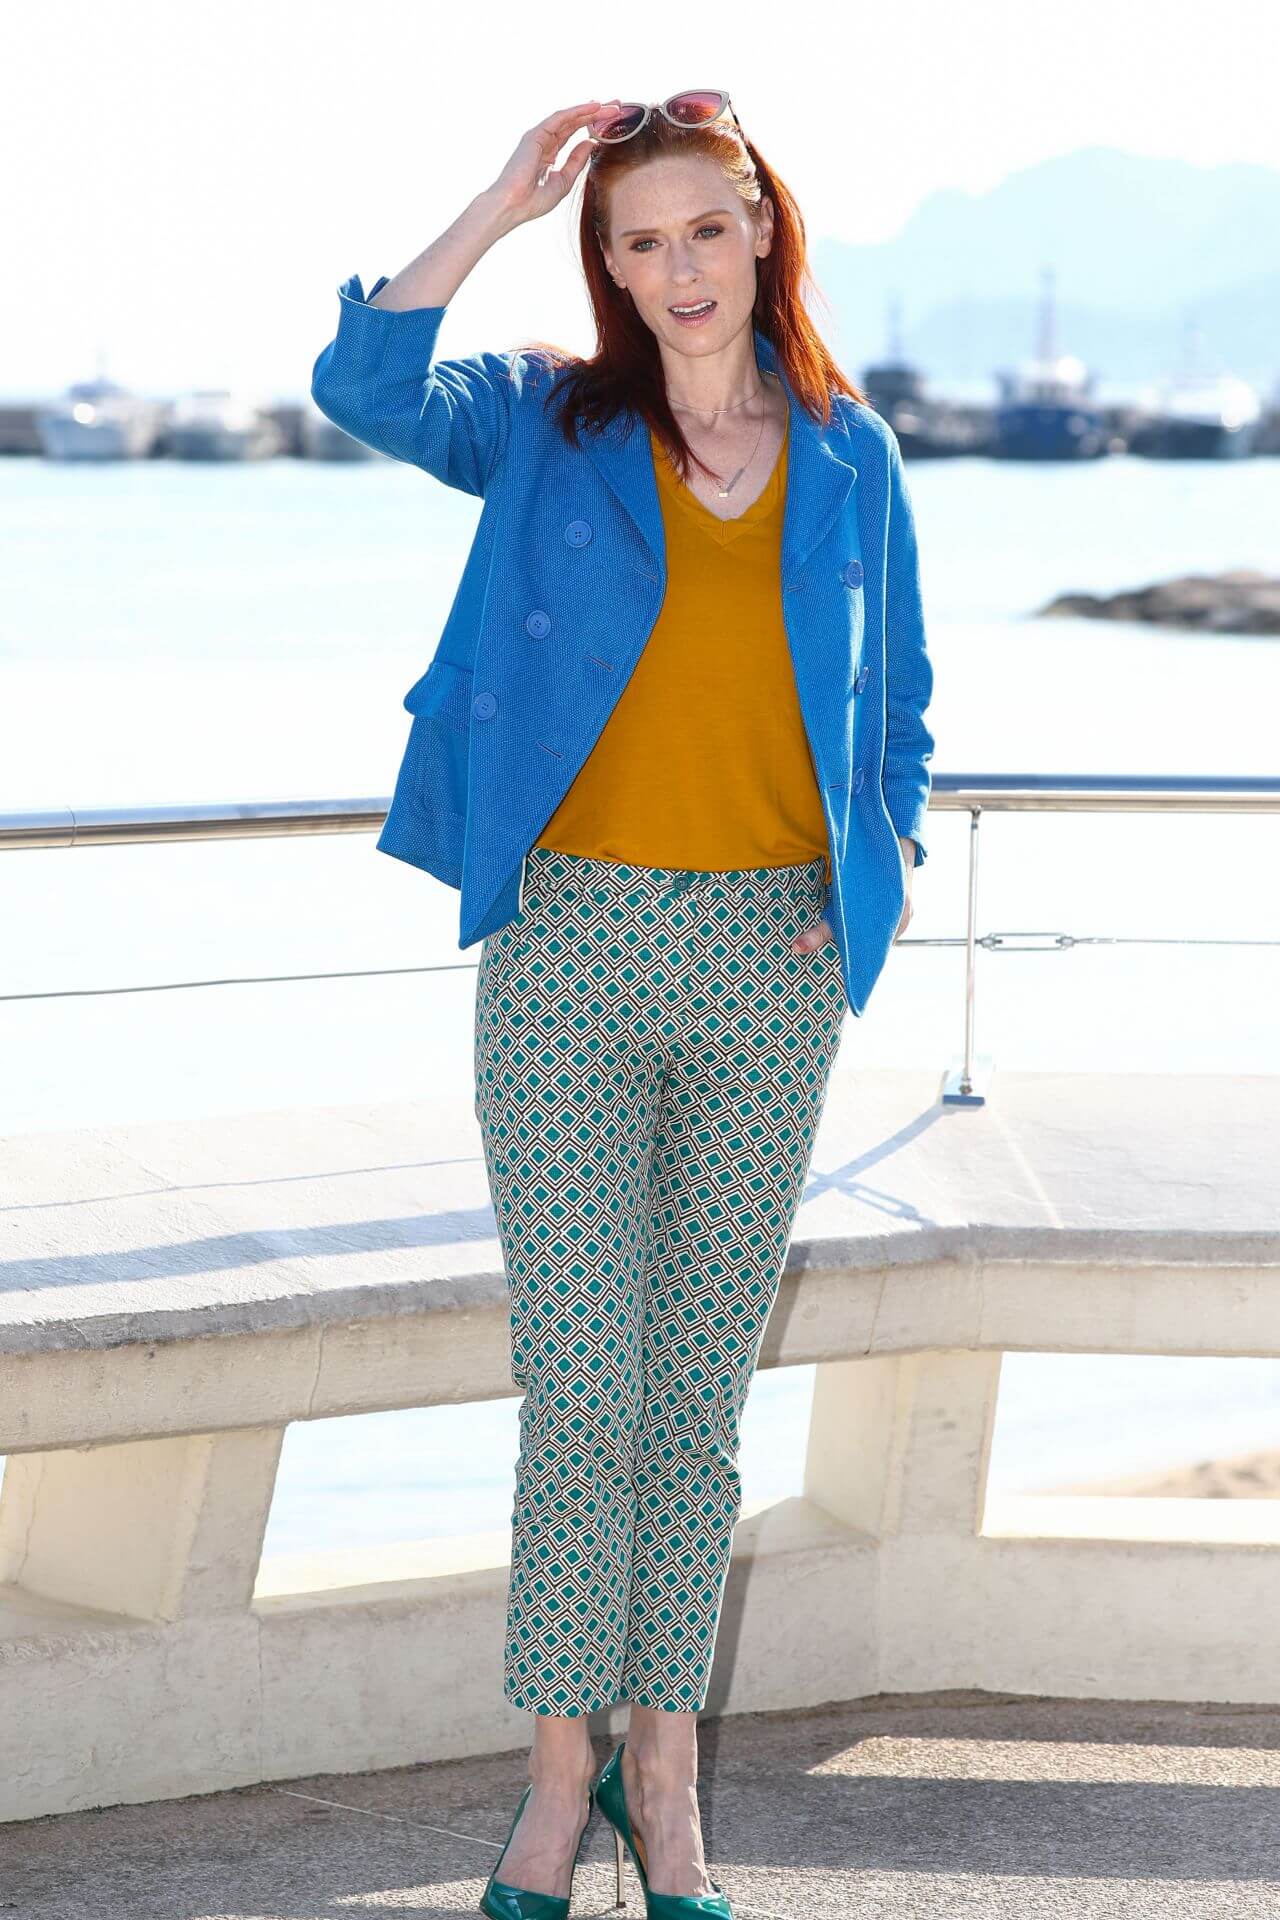 Audrey Fleurot Lovely In Yellow Top & Printed Pants With Blue Jacket Outfit